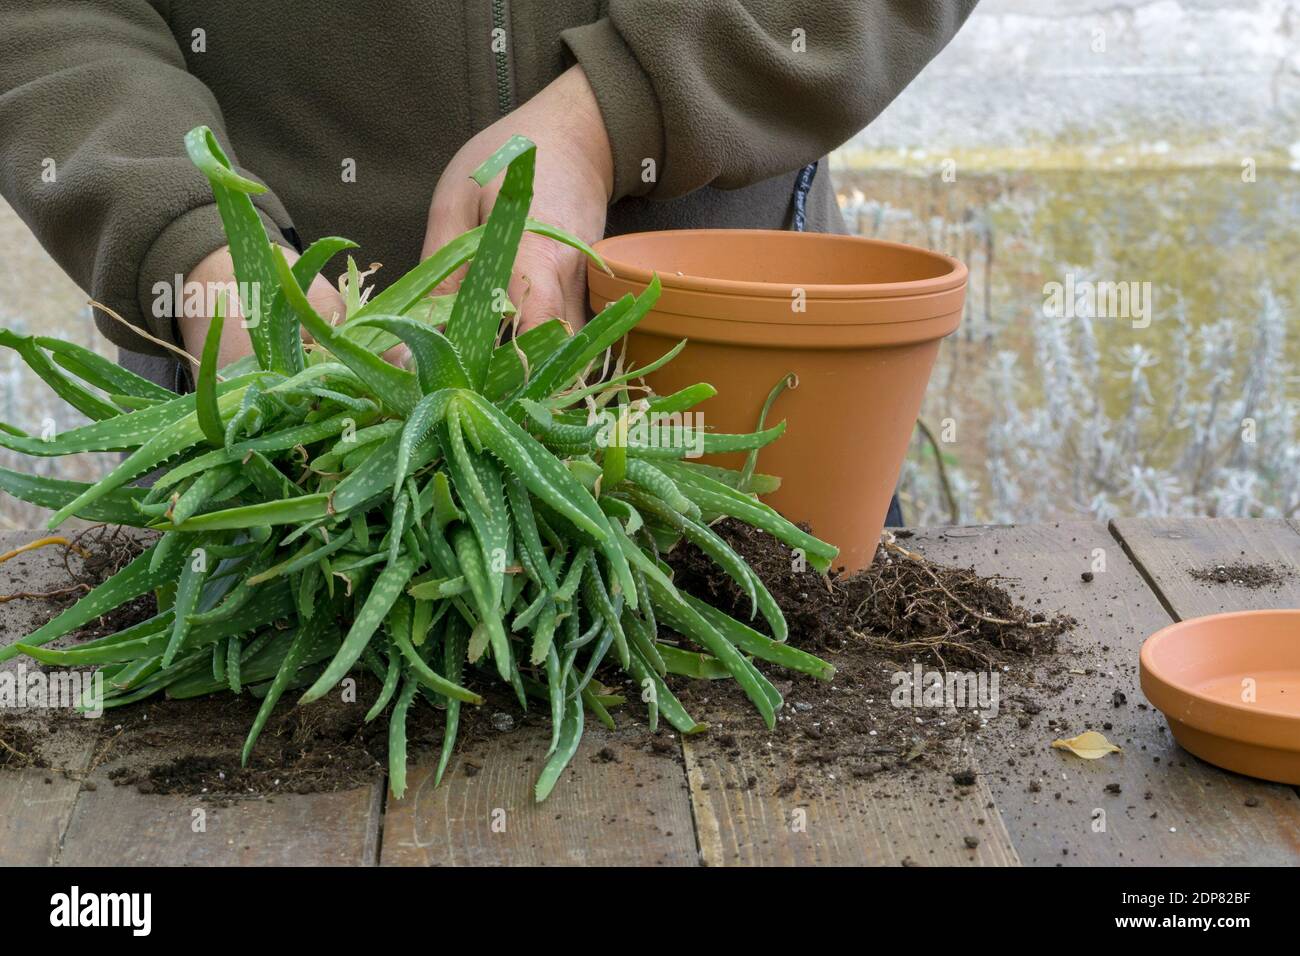 Midsection Of Person Planting Aloe Vera In Pot Stock Photo